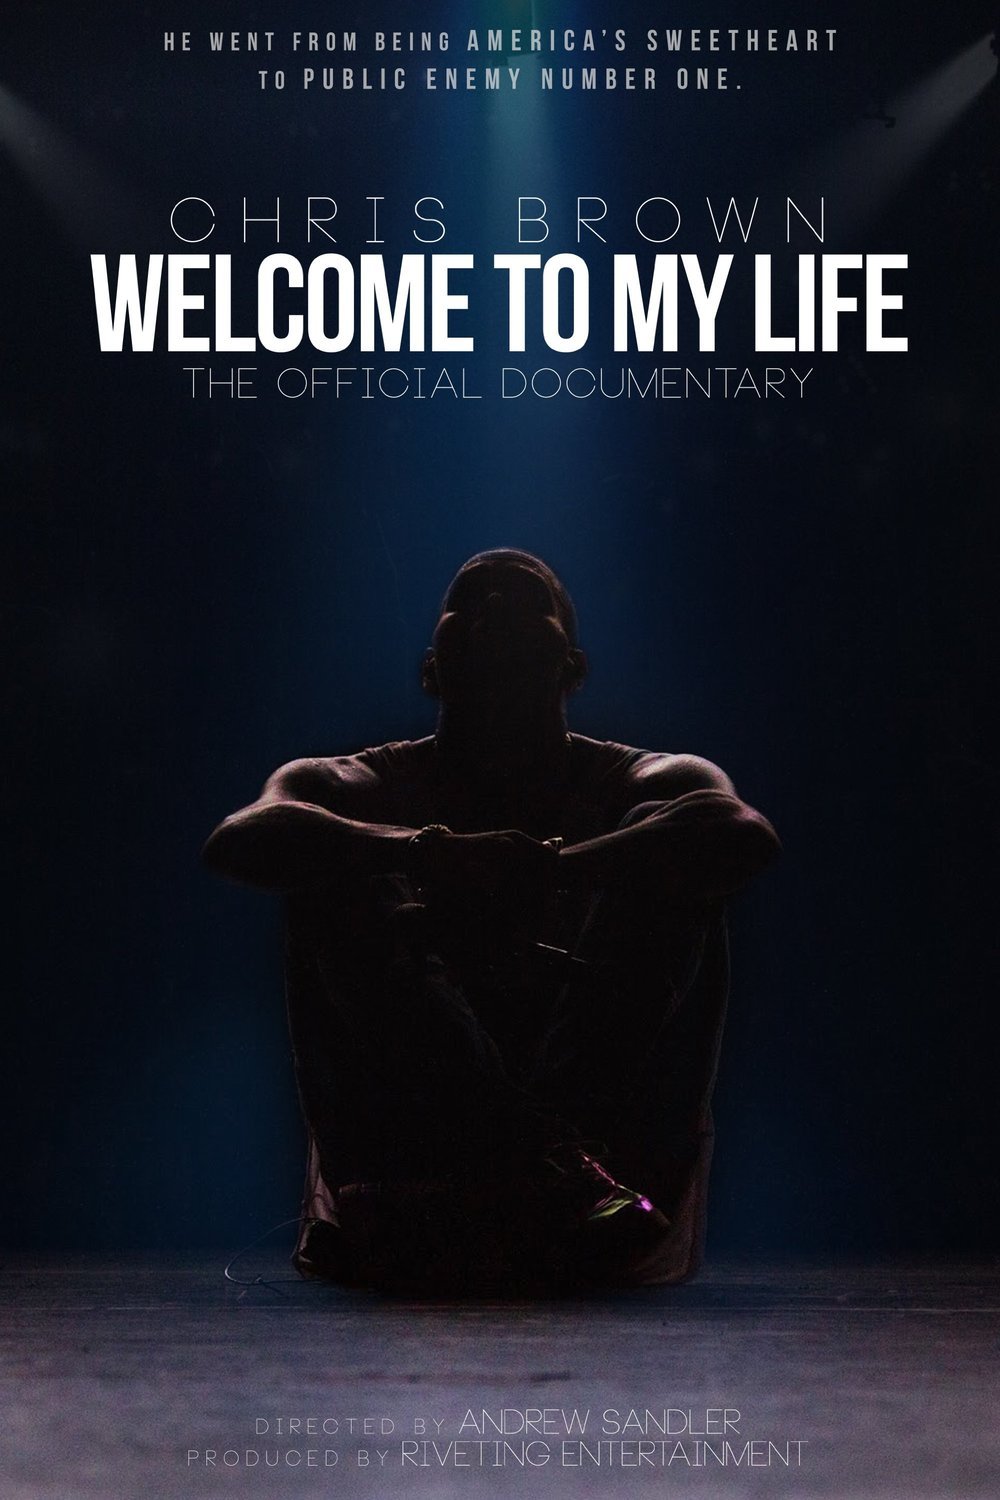 Poster of the movie Chris Brown: Welcome to My Life